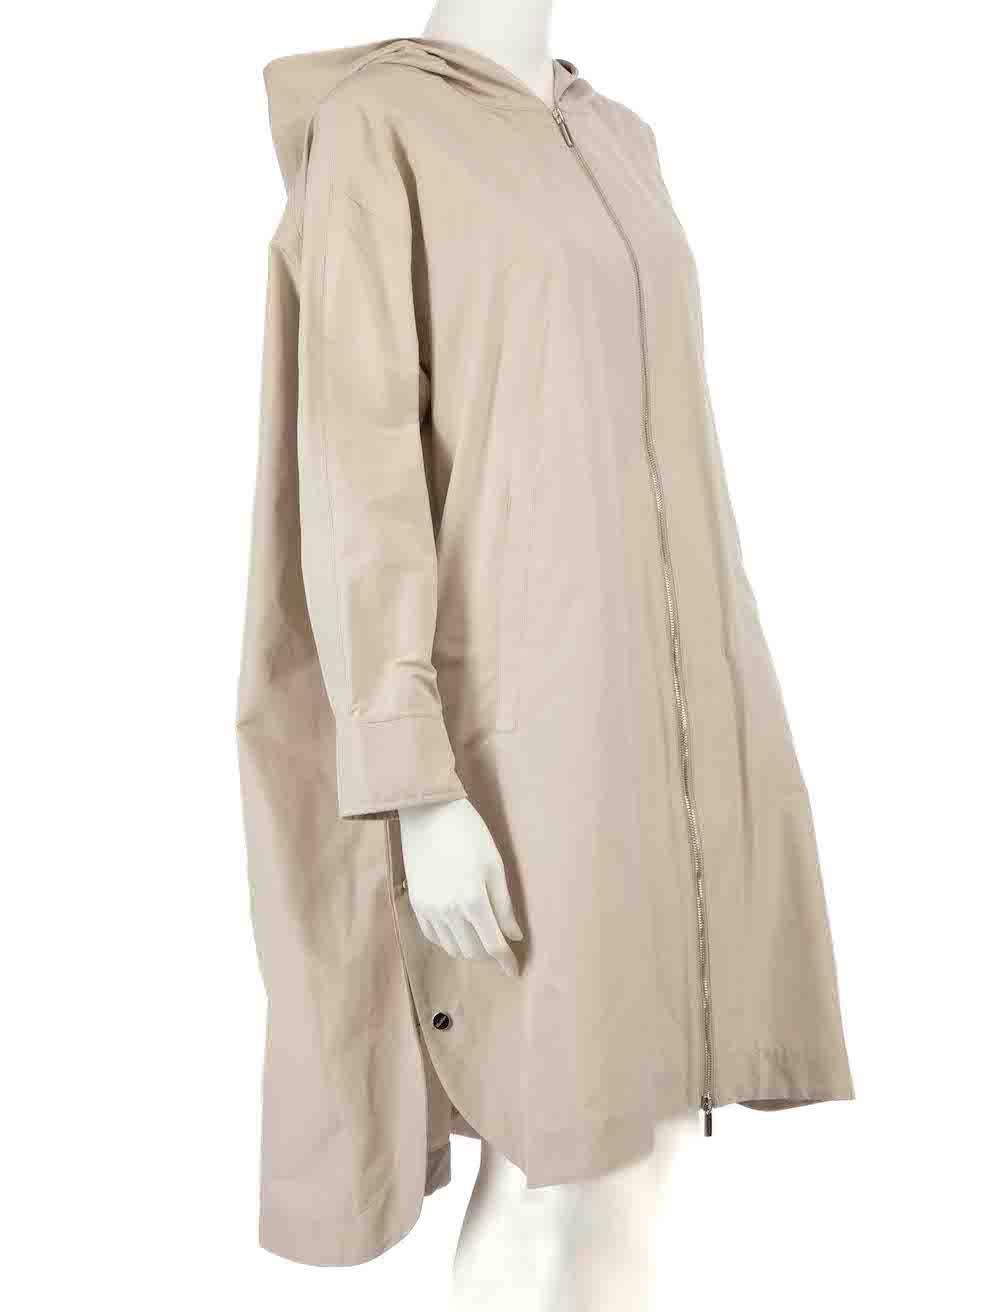 CONDITION is Very good. Minimal wear is evident where light discolouration is seen to the armpit on this used Max Mara The Cube designer resale item.
 
Details
Ecru
Cotton
Trench coat
Zip fastening
Snap button sides
Snap button opening on